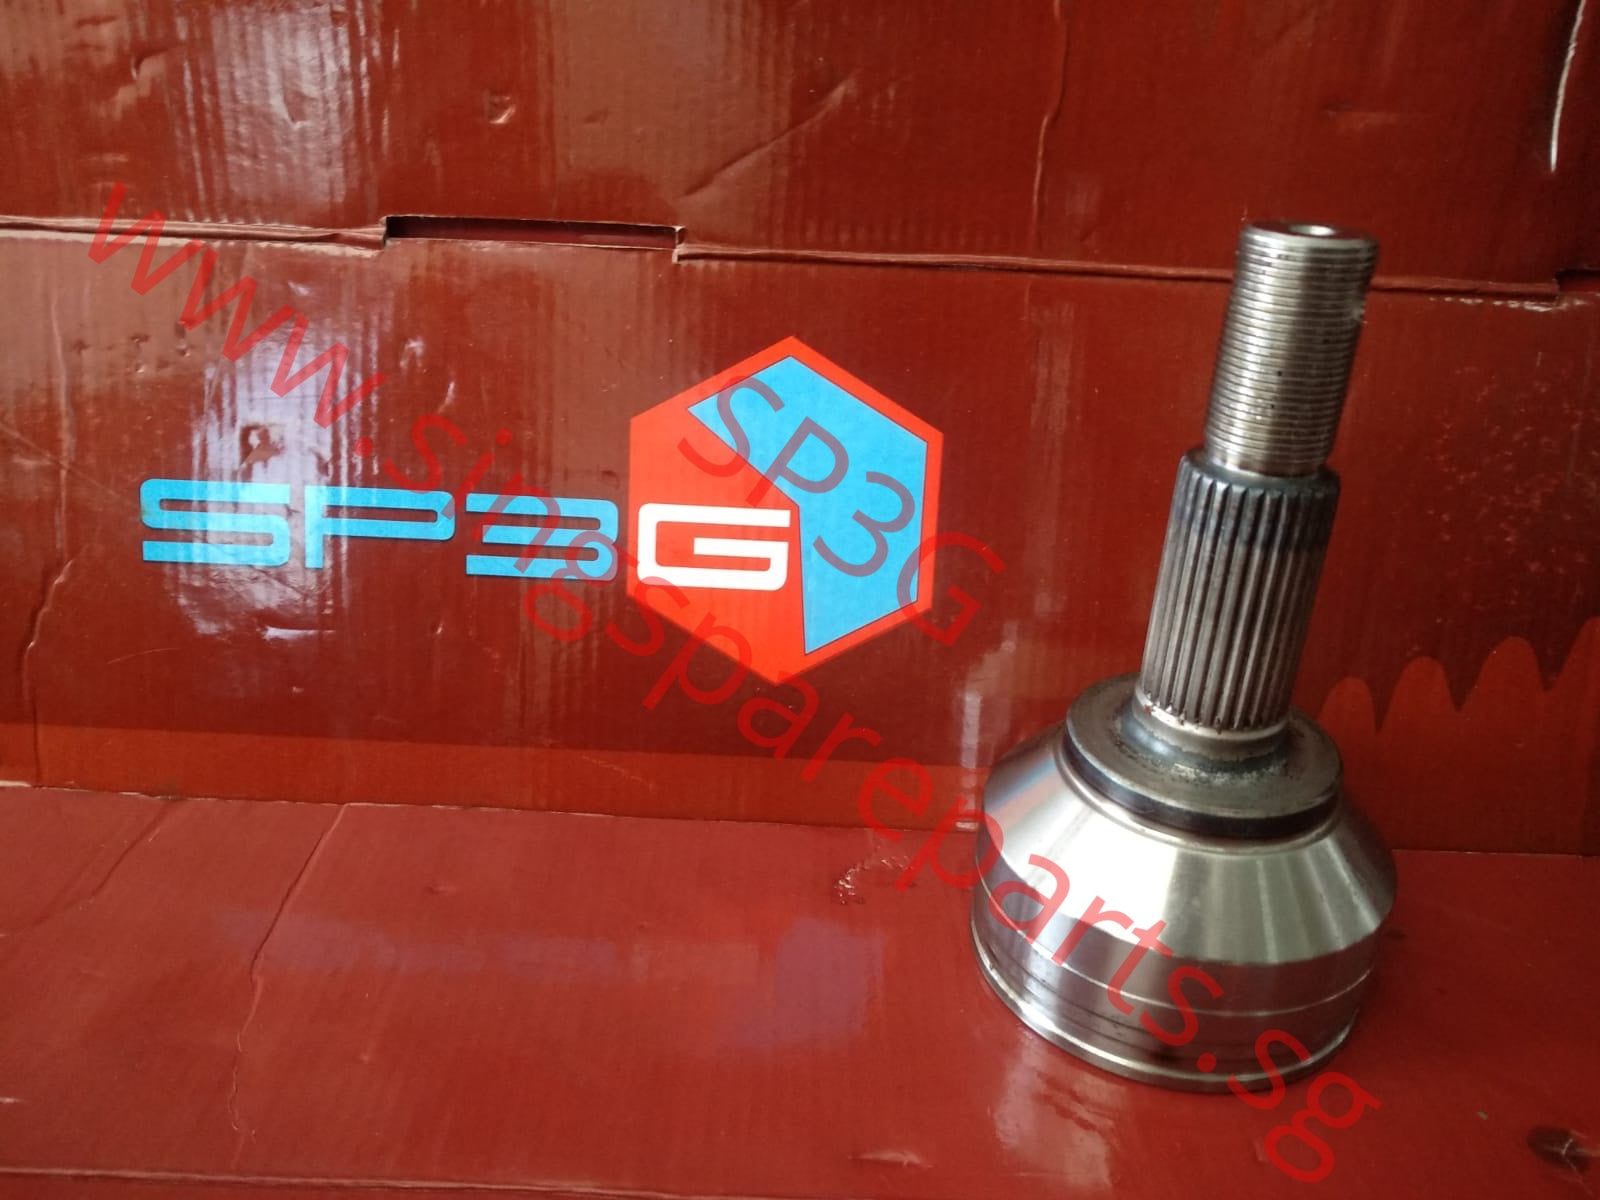 Nissan Qashqai CV Joint (Constant Velocity Joint) A=29 F=35 O=56